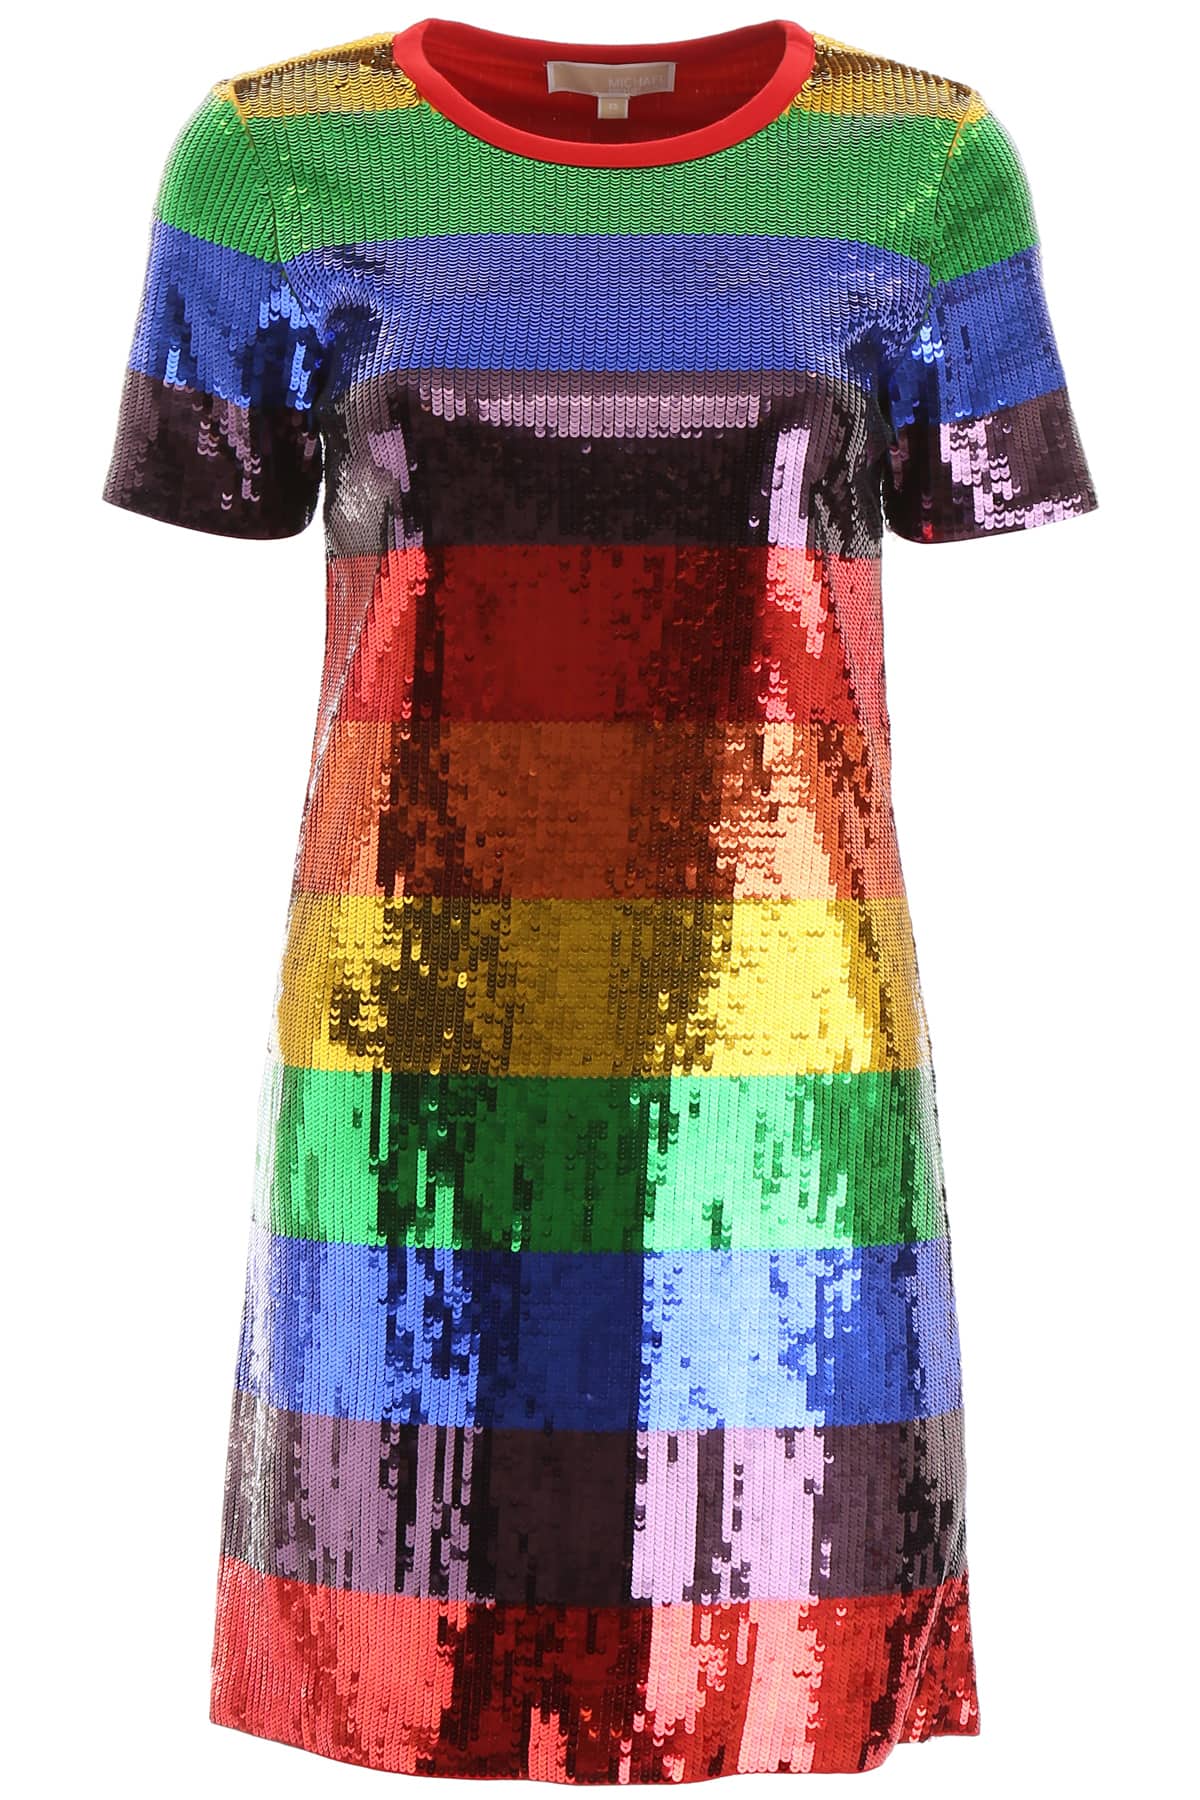 Michael Michael Kors sequin dress with multicolor stripes. It features micro-ribbed neck and jersey 